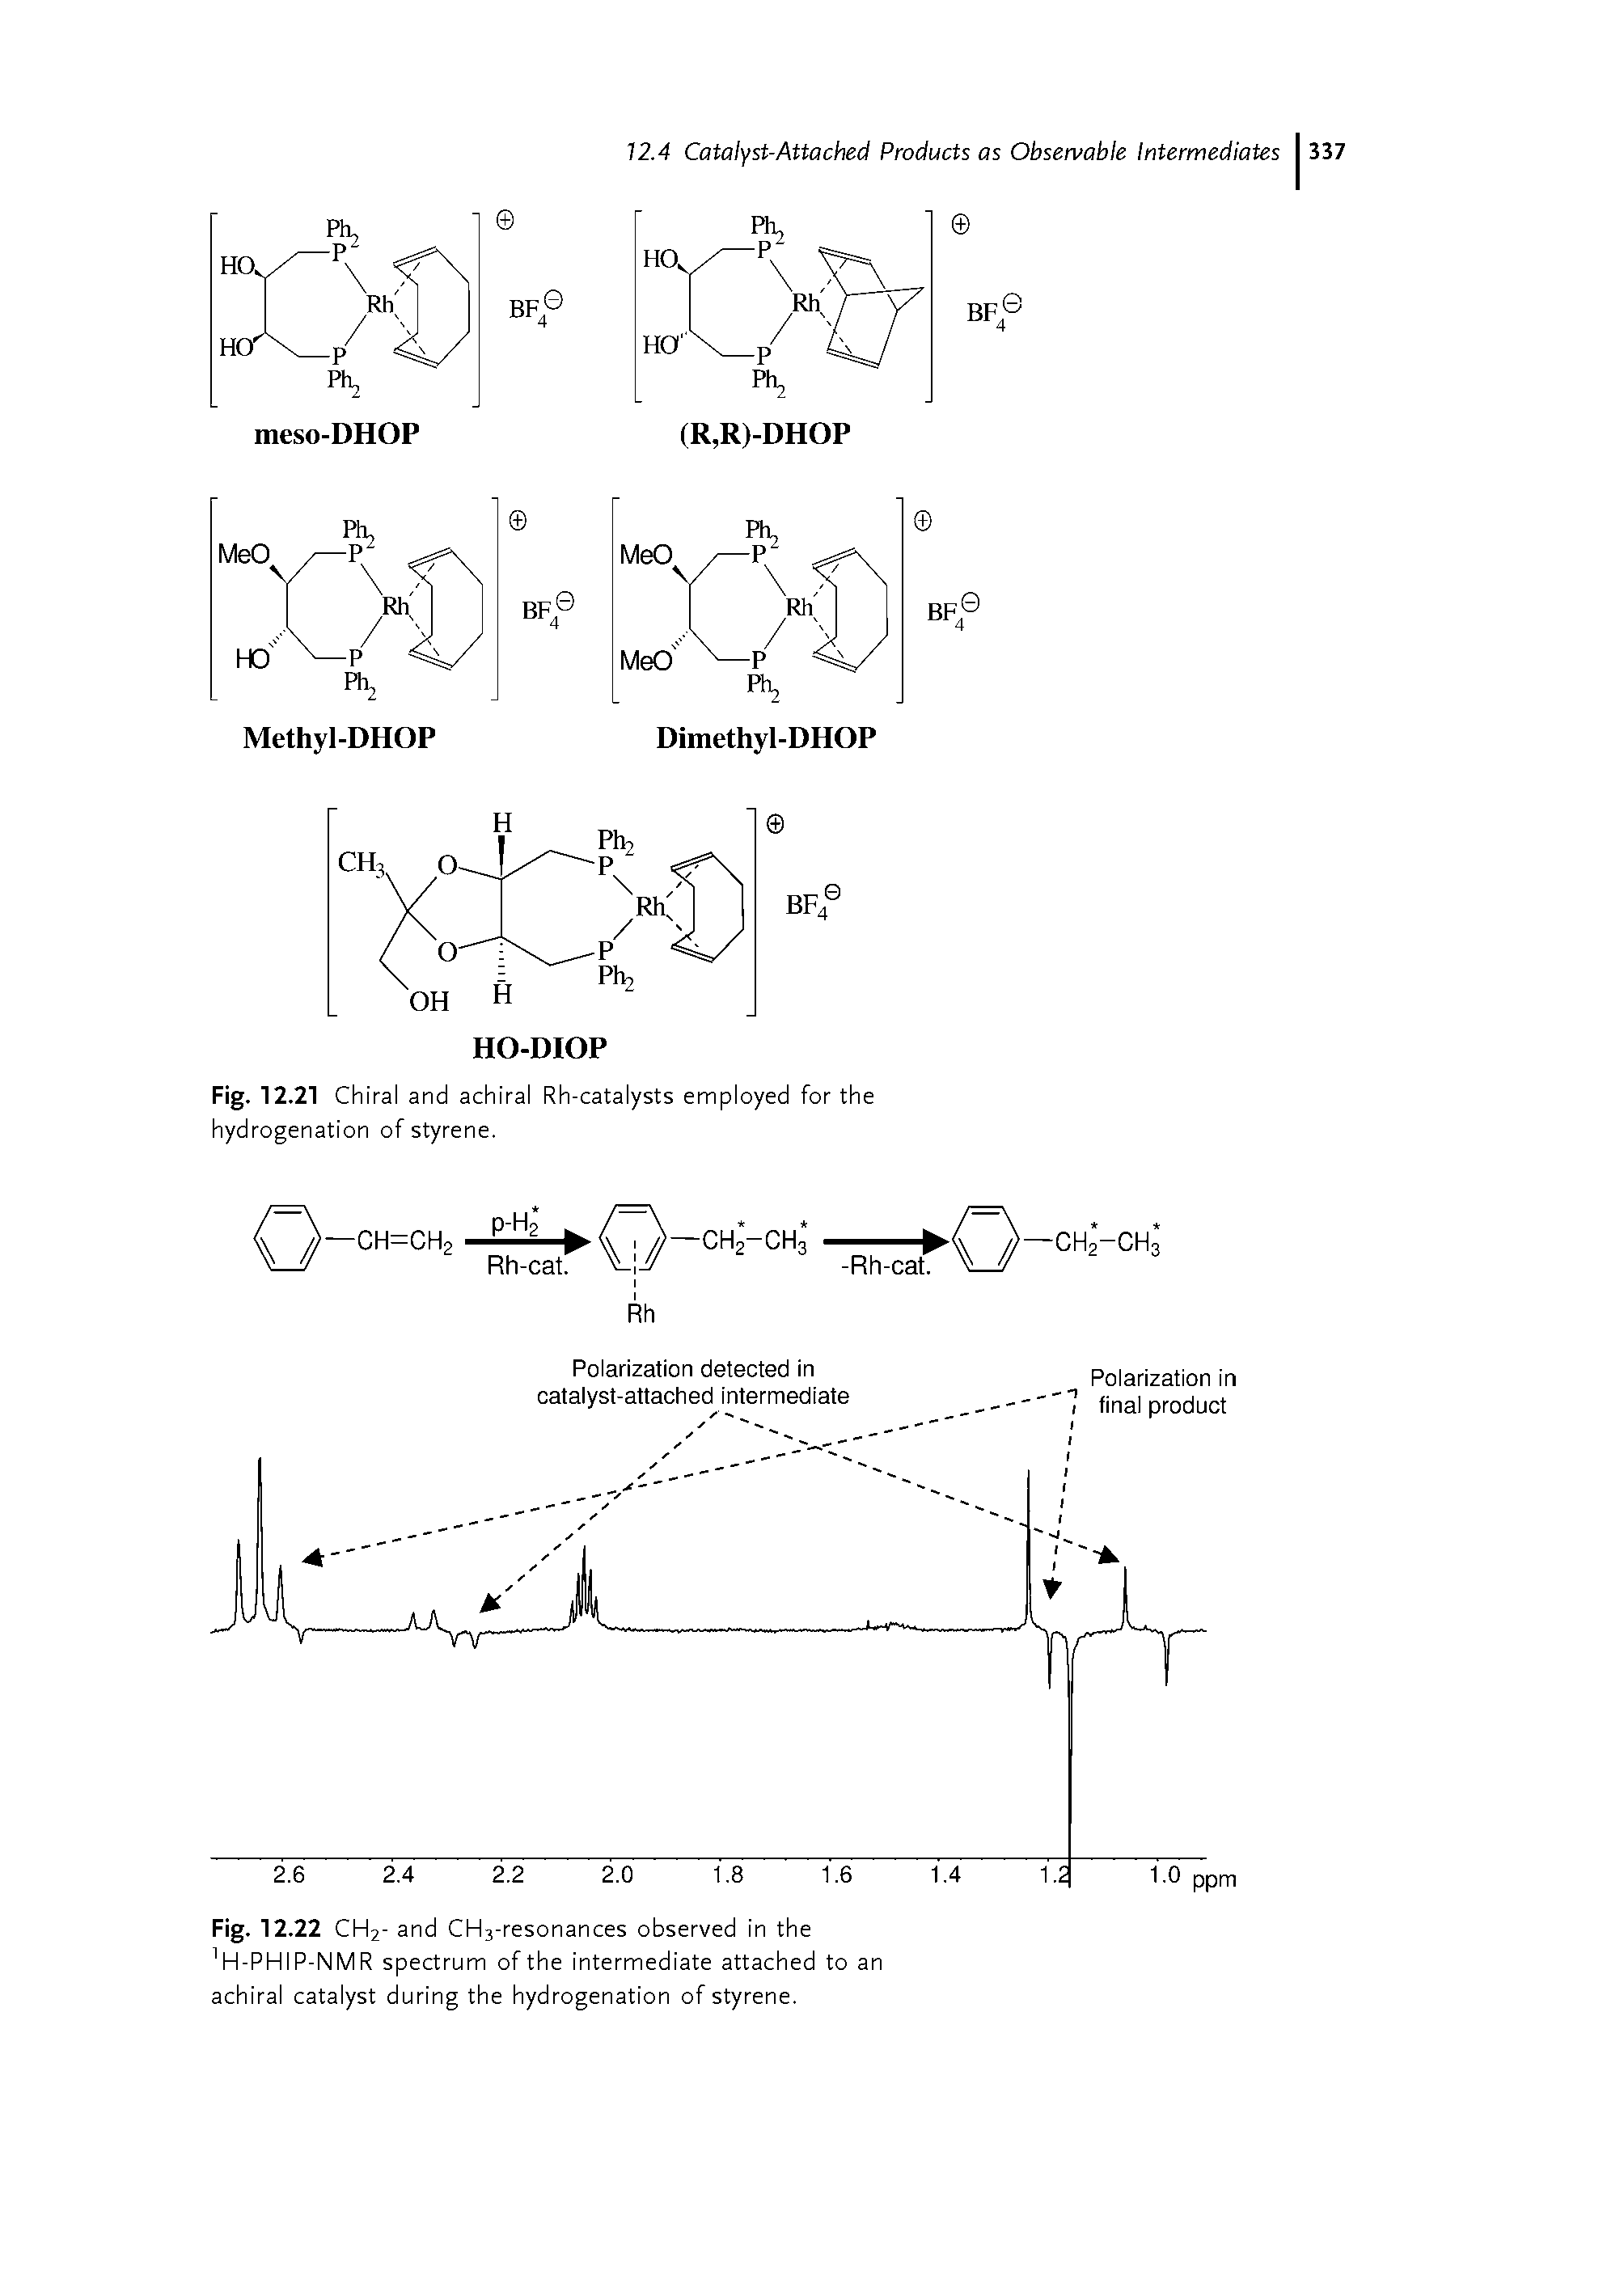 Fig. 12.22 CH2- and CH3-resonances observed in the -PHIP-NMR spectrum of the intermediate attached to an achiral catalyst during the hydrogenation of styrene.